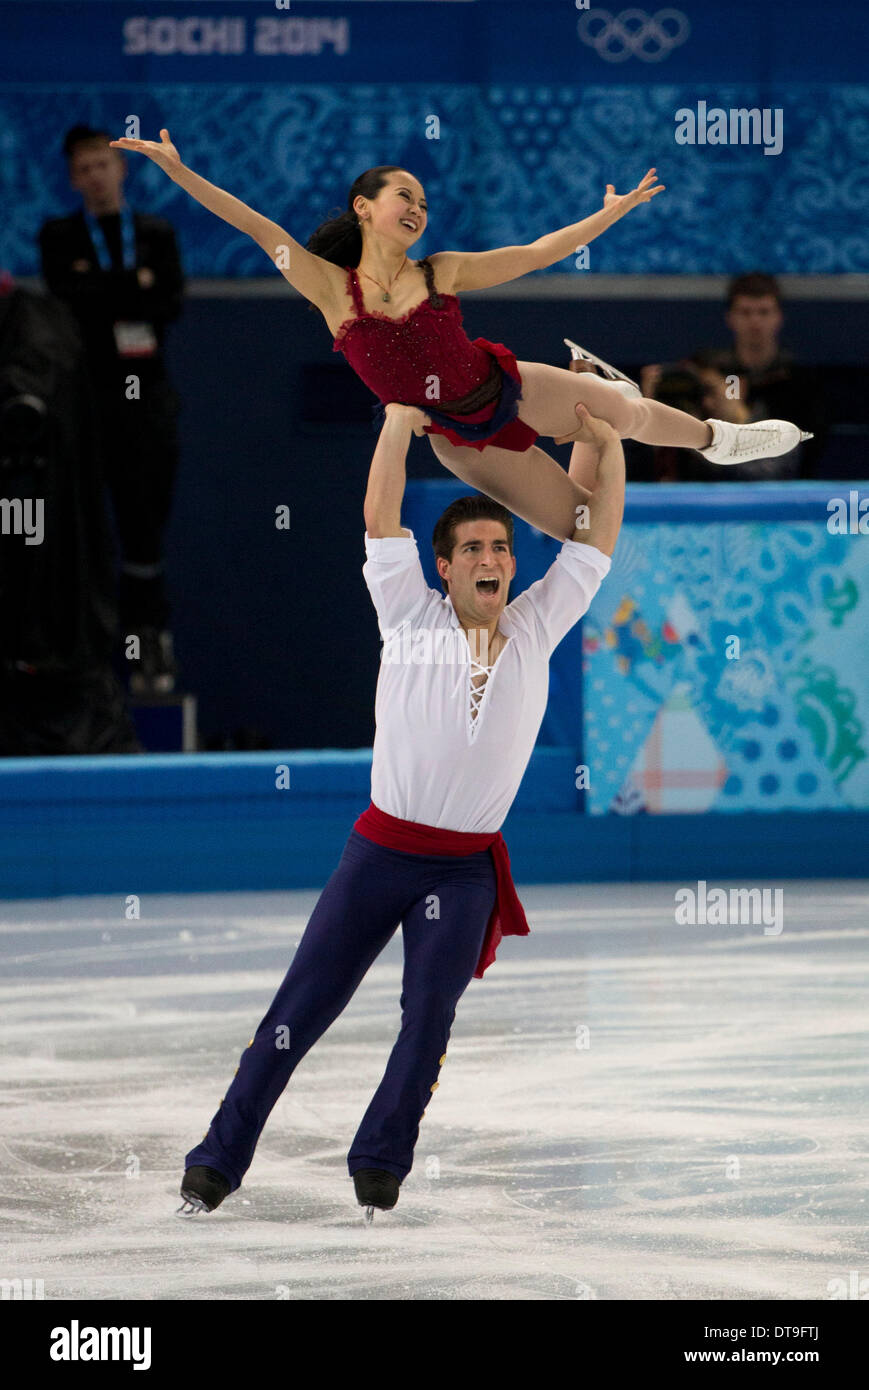 Sochi, Russia. 12th Feb, 2014. United States's Felicia Zhang and Nathan Bartholomay perform their routine during Team Pairs Free Skating at Iceberg Skating Palace during the 2014 Winter Olympics in Sochi. Credit:  Paul Kitagaki Jr./ZUMAPRESS.com/Alamy Live News Stock Photo